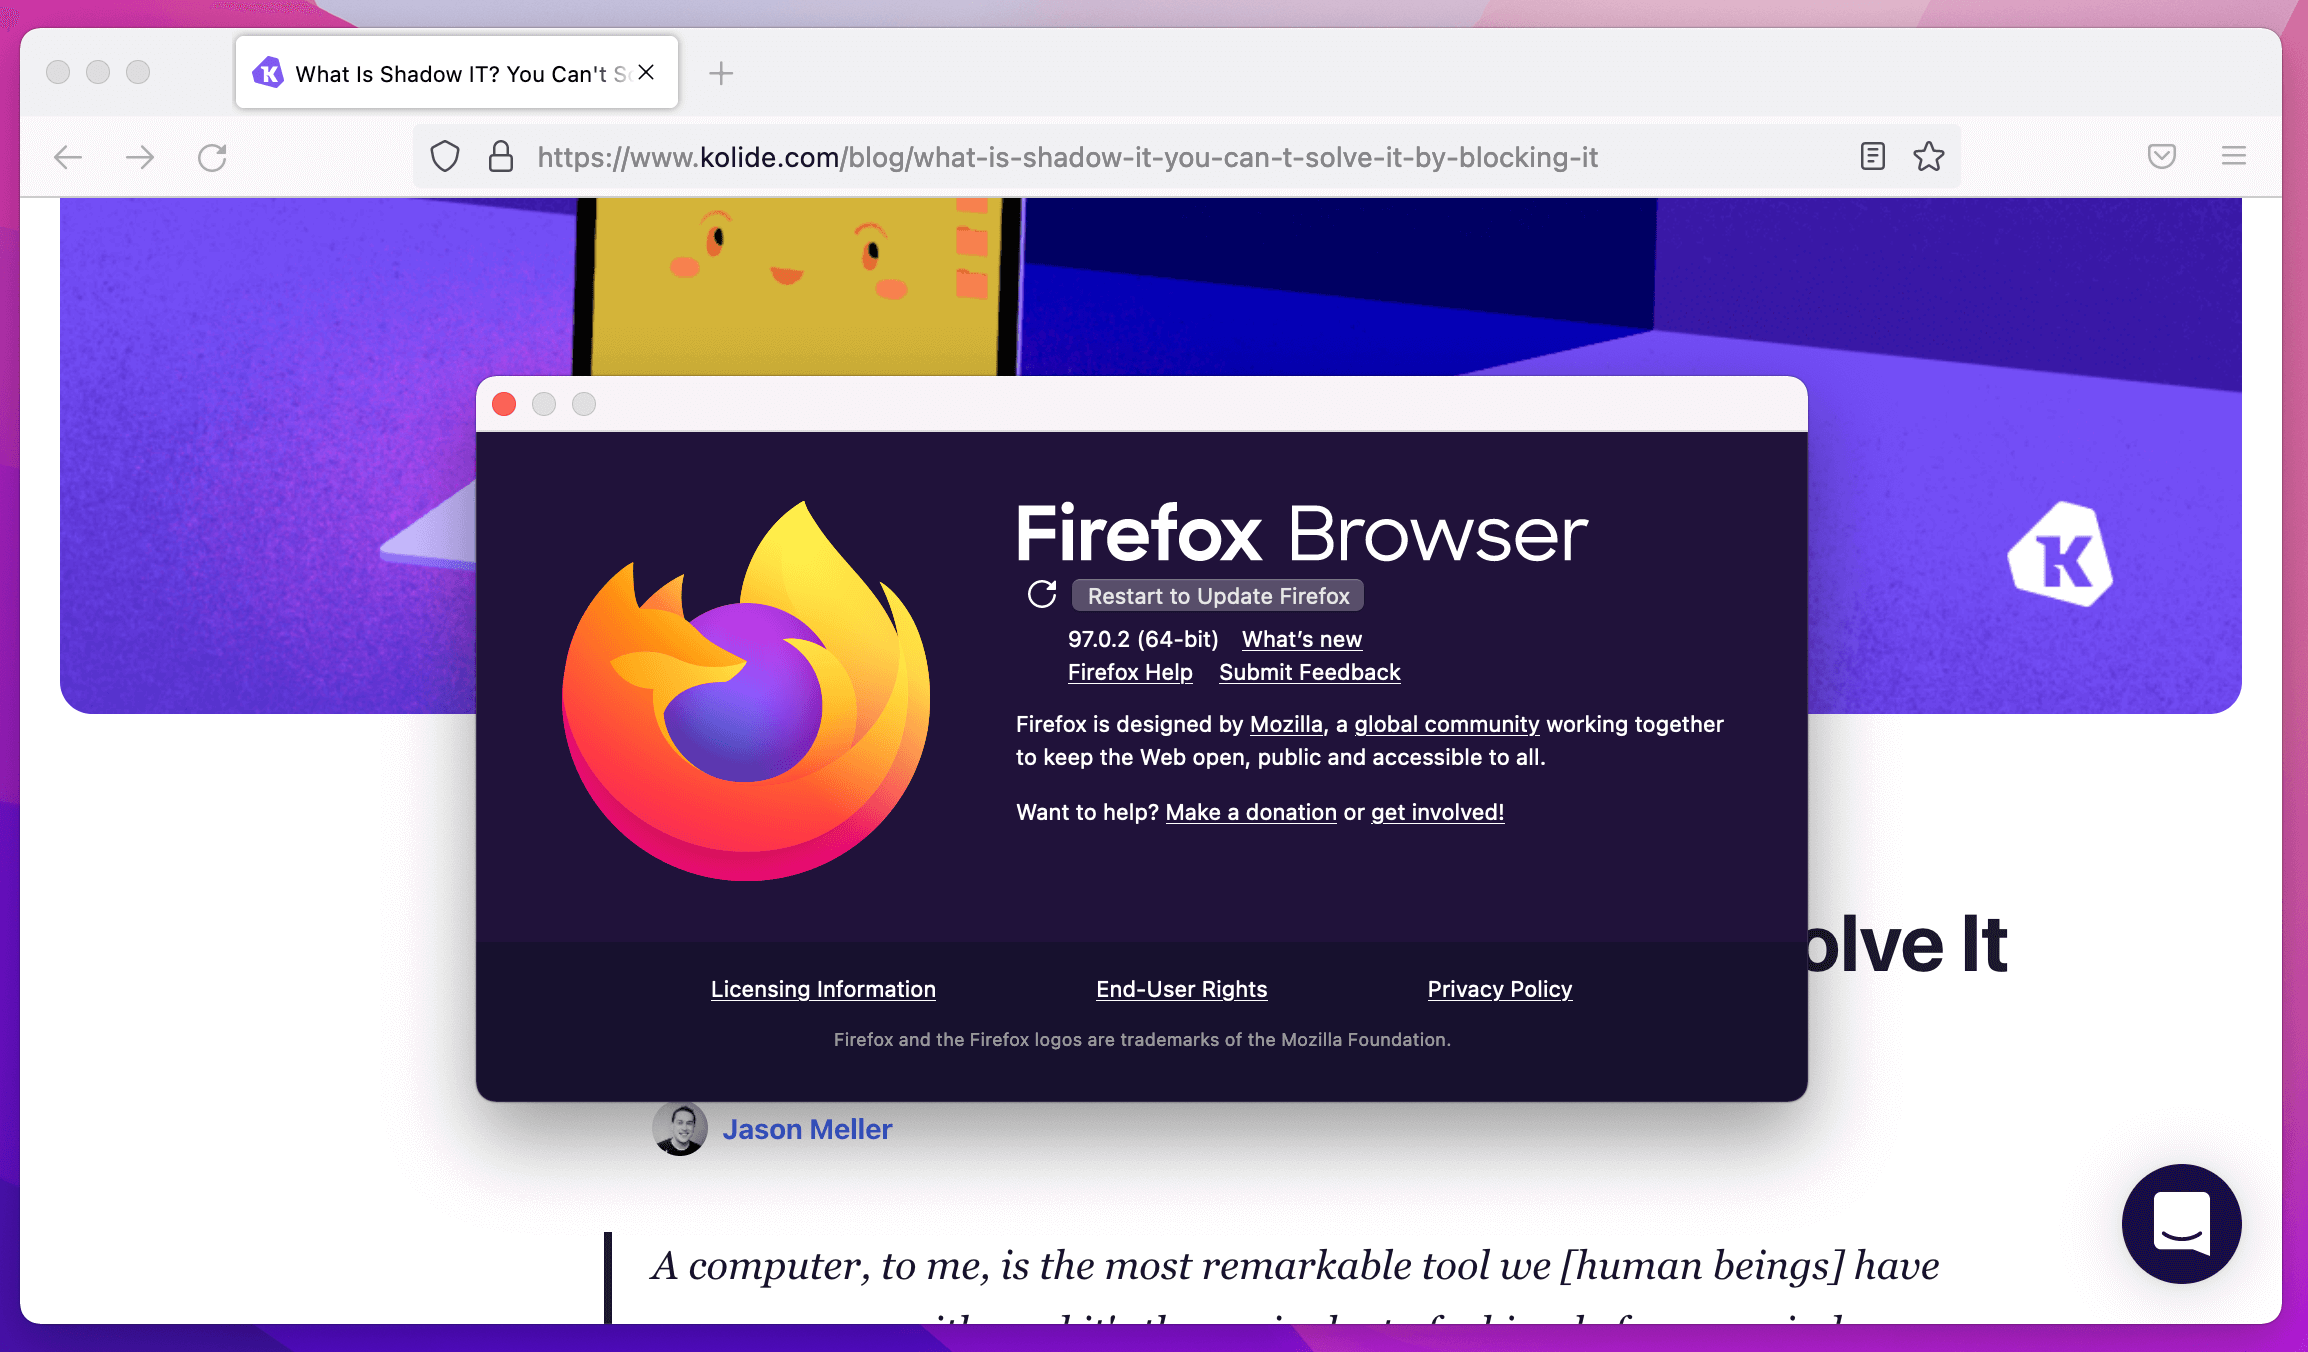 A screenshot of the "Firefox browser on macOS 